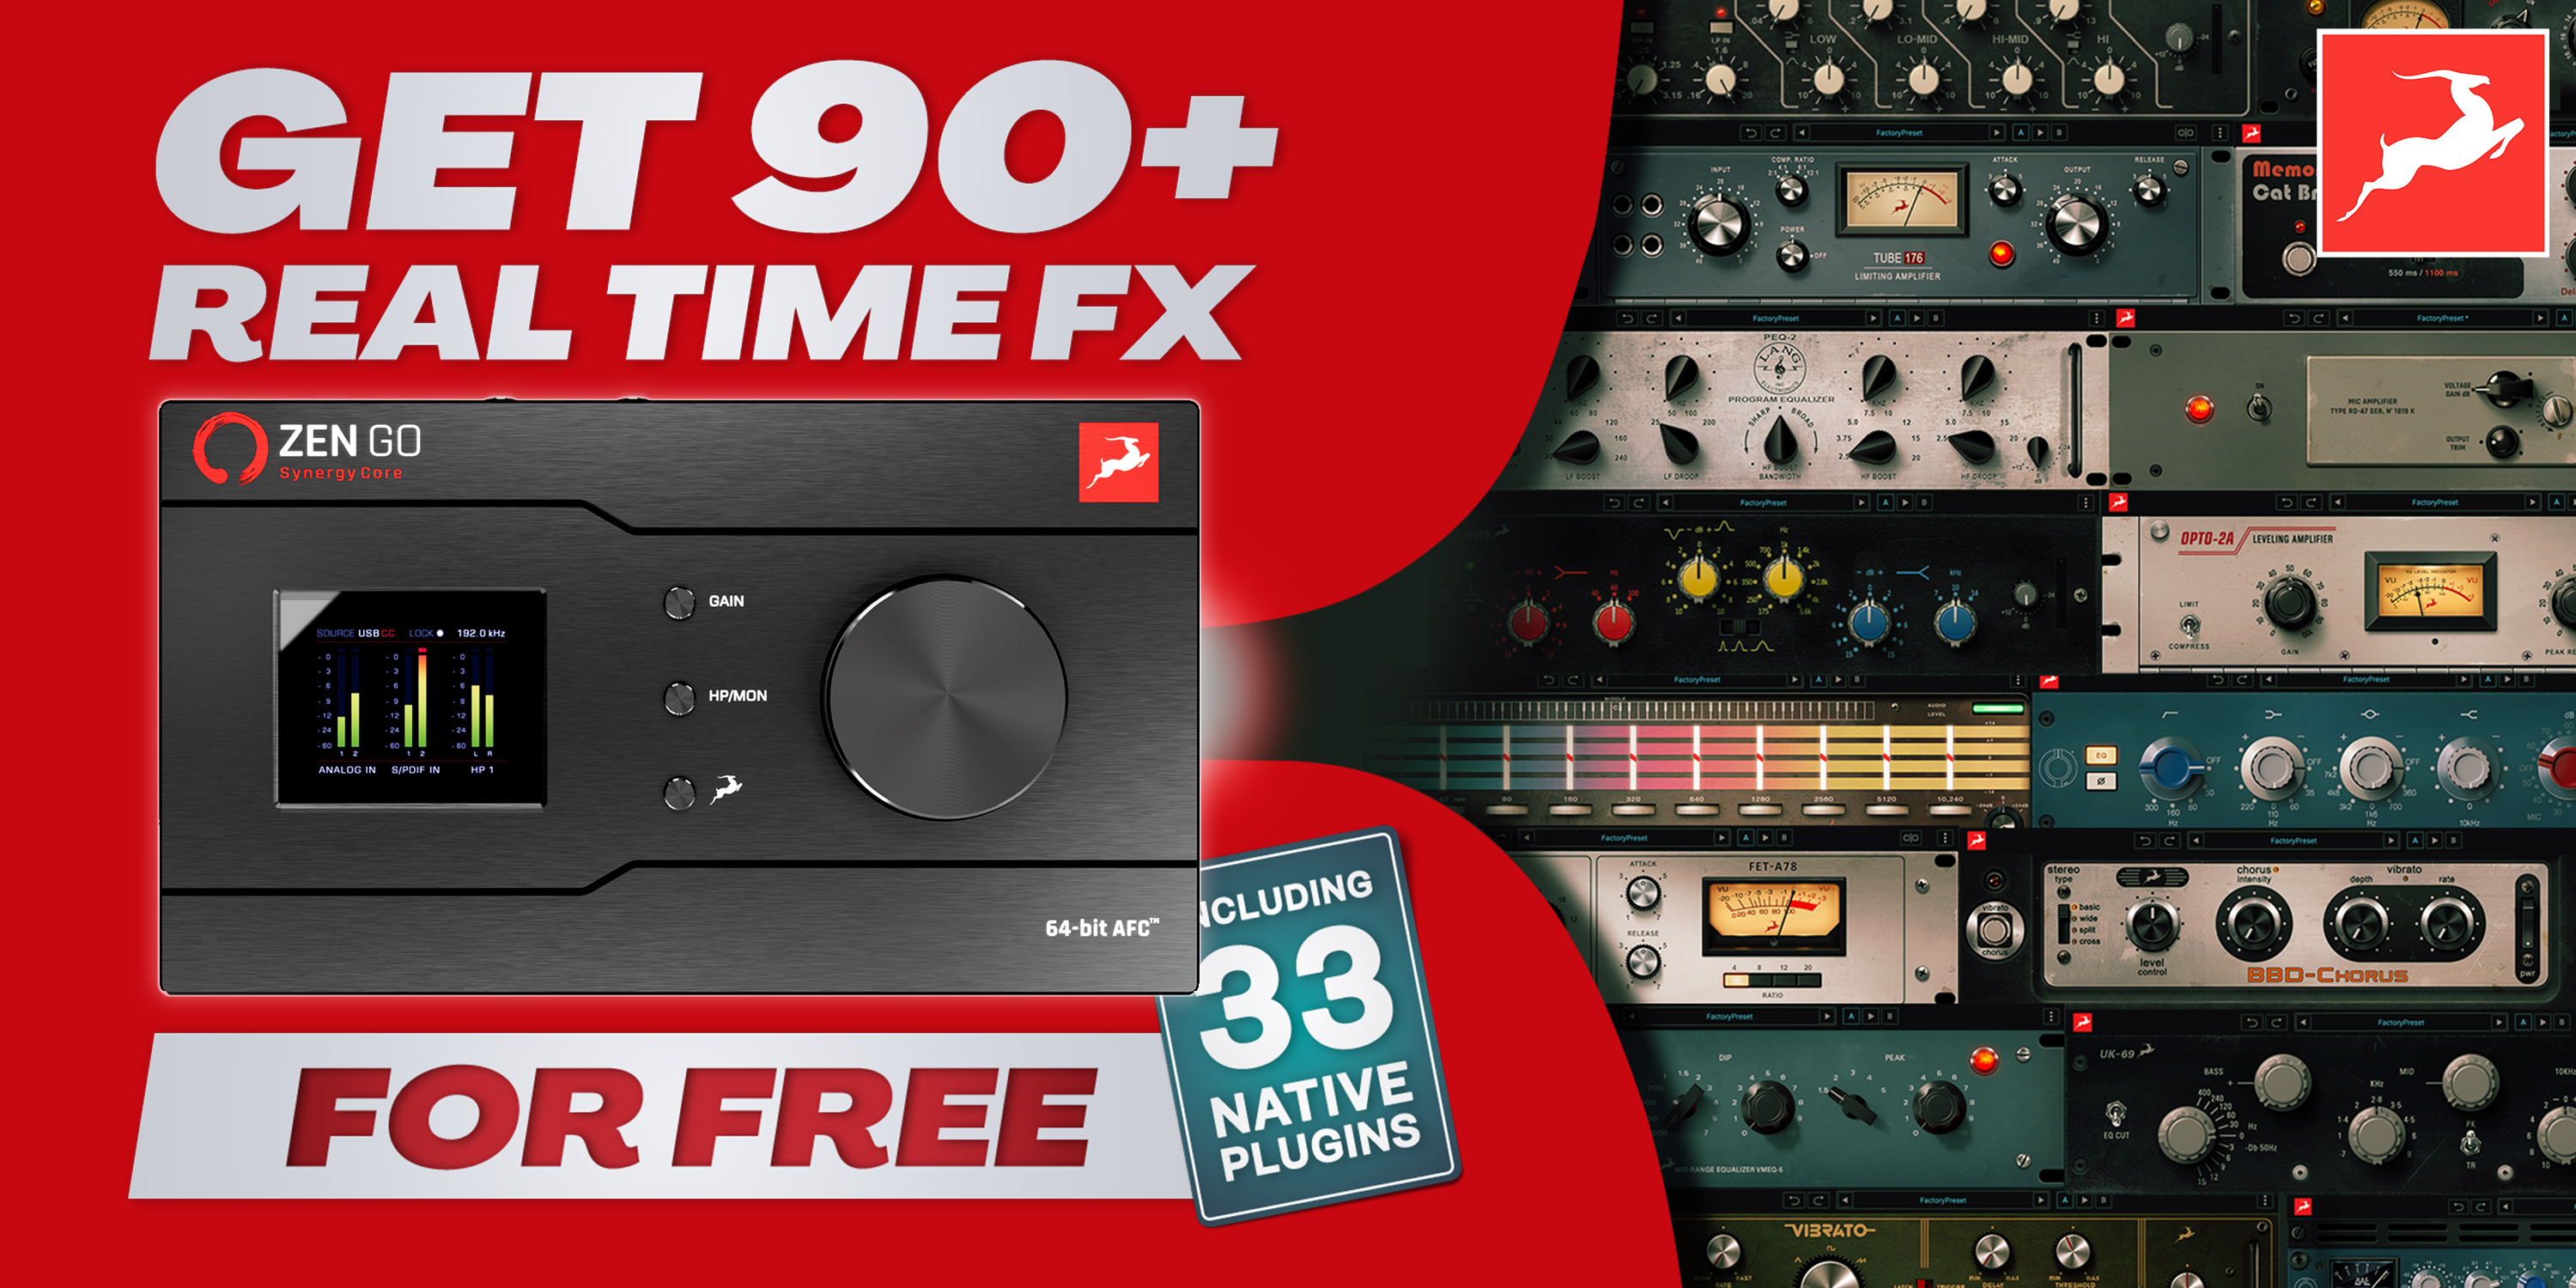 GET 90+ REAL TIME FX FOR FREE!